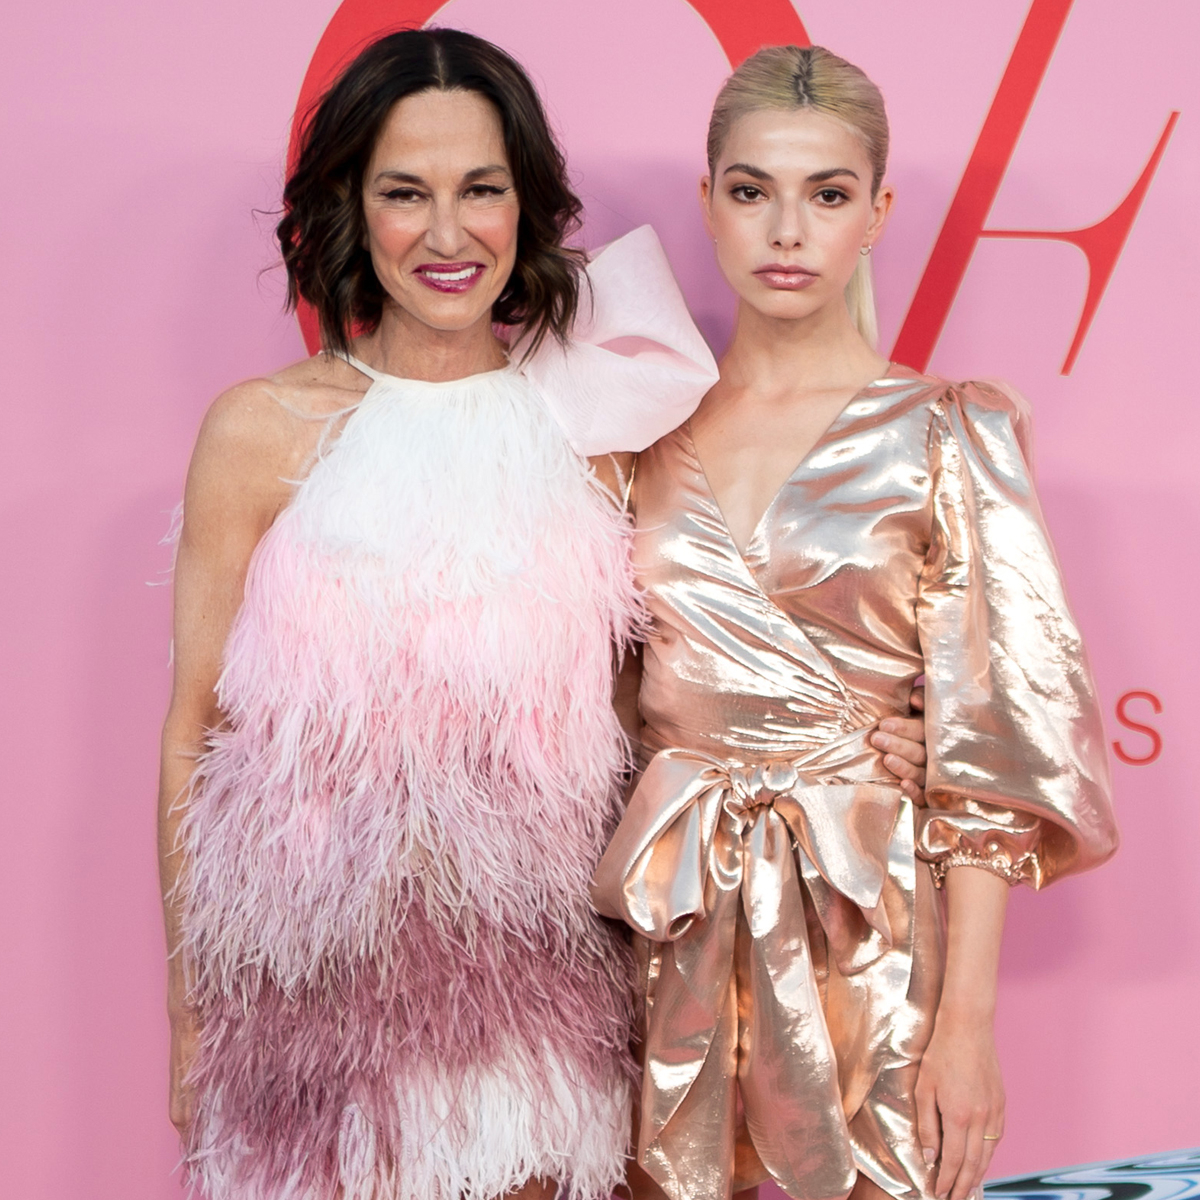 Kit Keenan Shares Why She's Not Taking Over Mom Cynthia Rowley's Brand